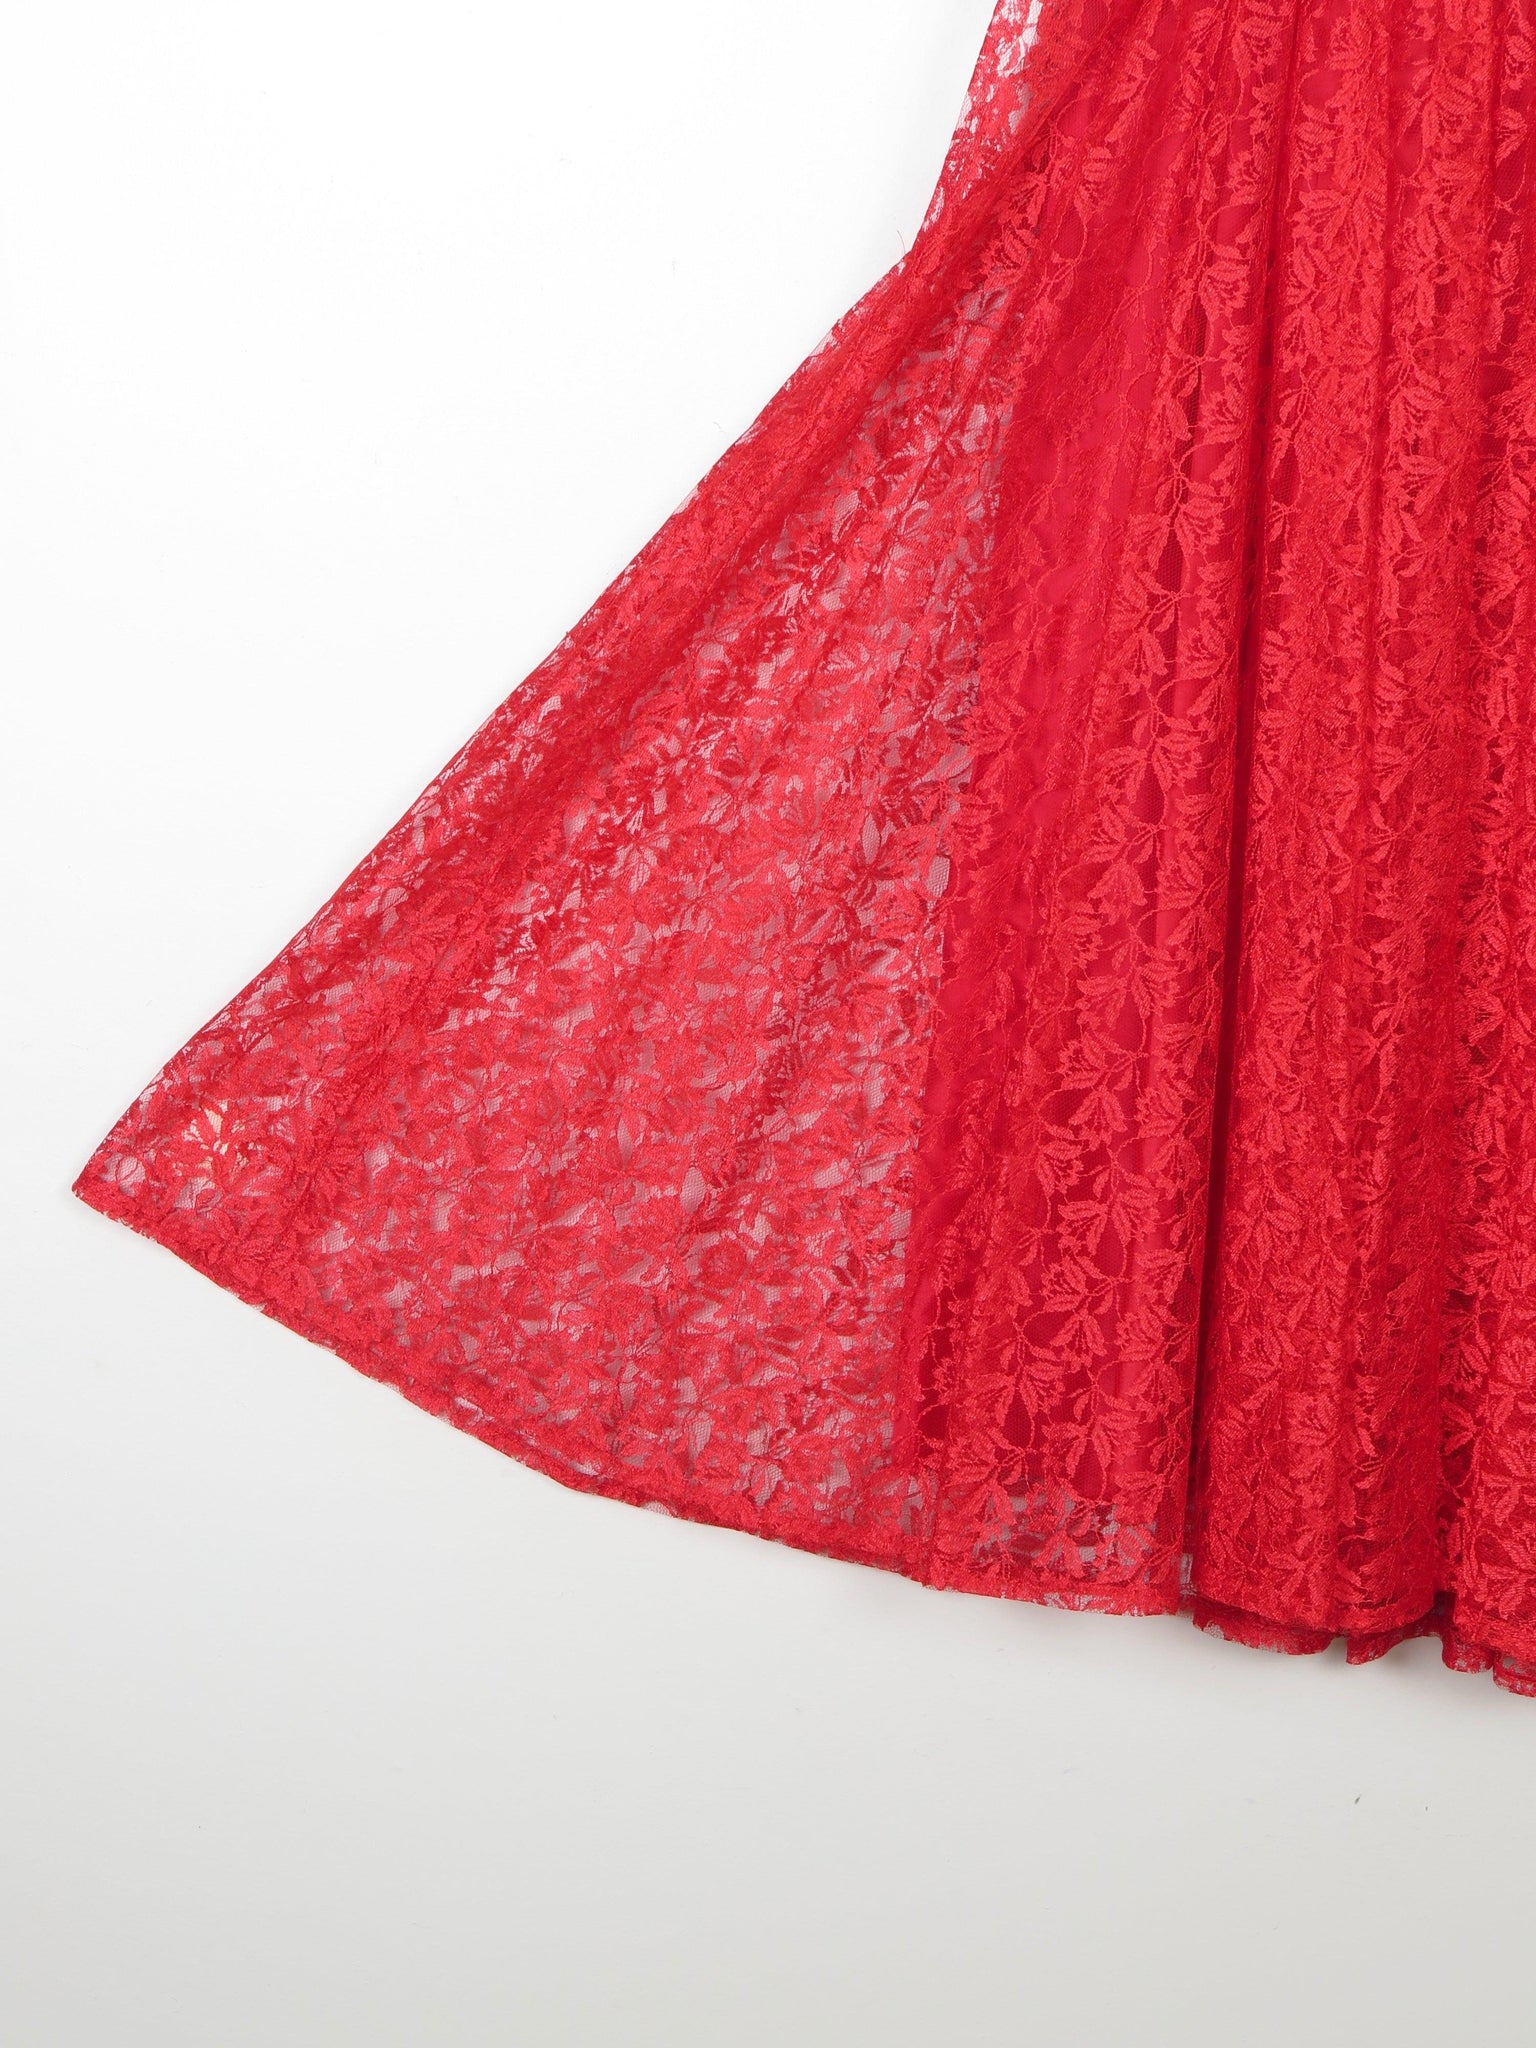 Red Lace & Sequin 1950s Style Fit & Flare Dress 6/8 - The Harlequin